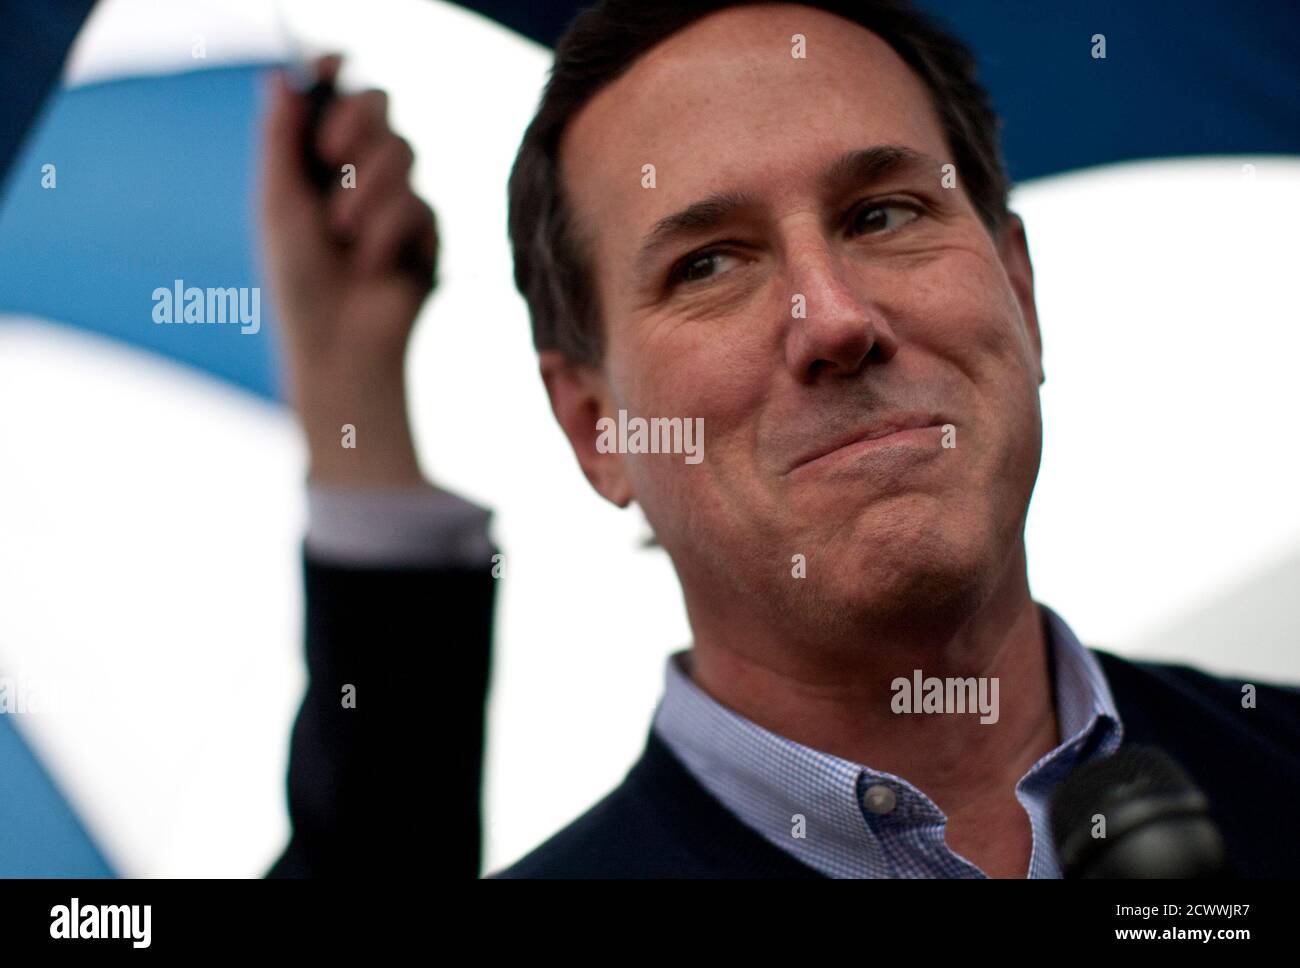 U.S. presidential primary candidate Rick Santorum arrives for a campaign rally at Hudson's Smokehouse in Lexington, South Carolina January 20, 2012. REUTERS/Benjamin Myers    (UNITED STATES - Tags: POLITICS ELECTIONS) Stock Photo